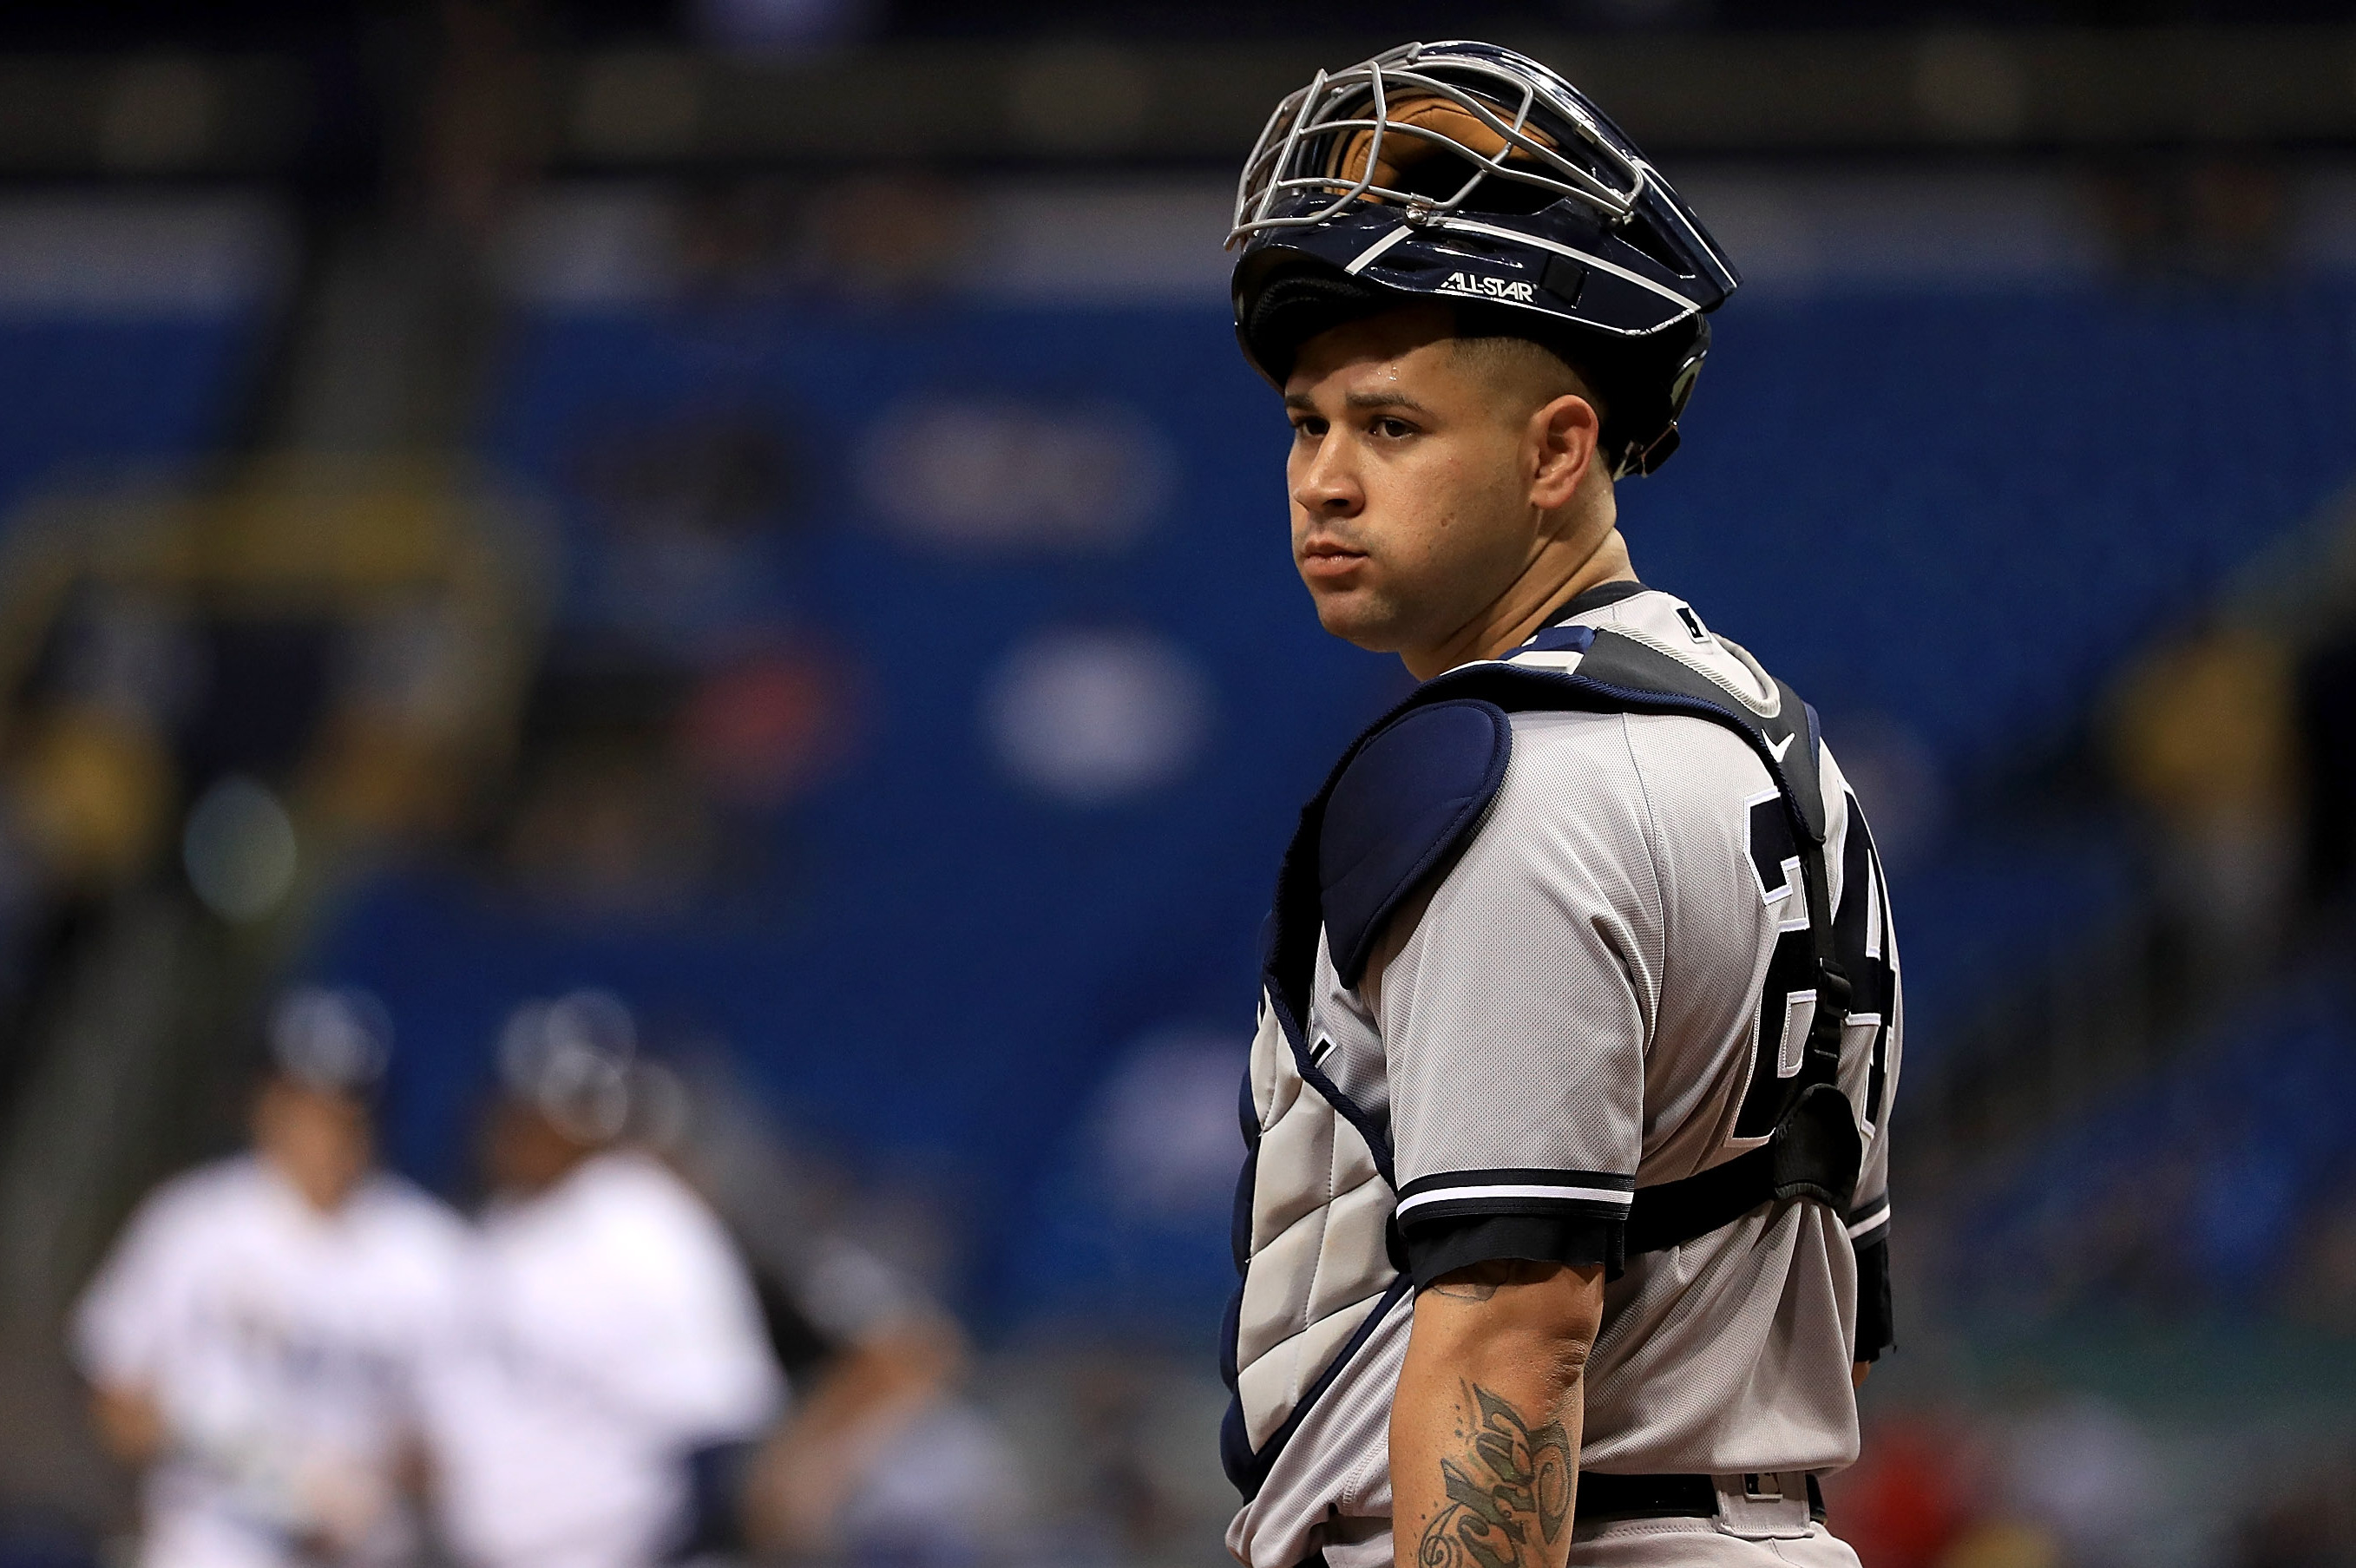 Gary Sanchez S Lack Of Hustle Costs Yankees Potential Tying Run In Loss Vs Rays Bleacher Report Latest News Videos And Highlights